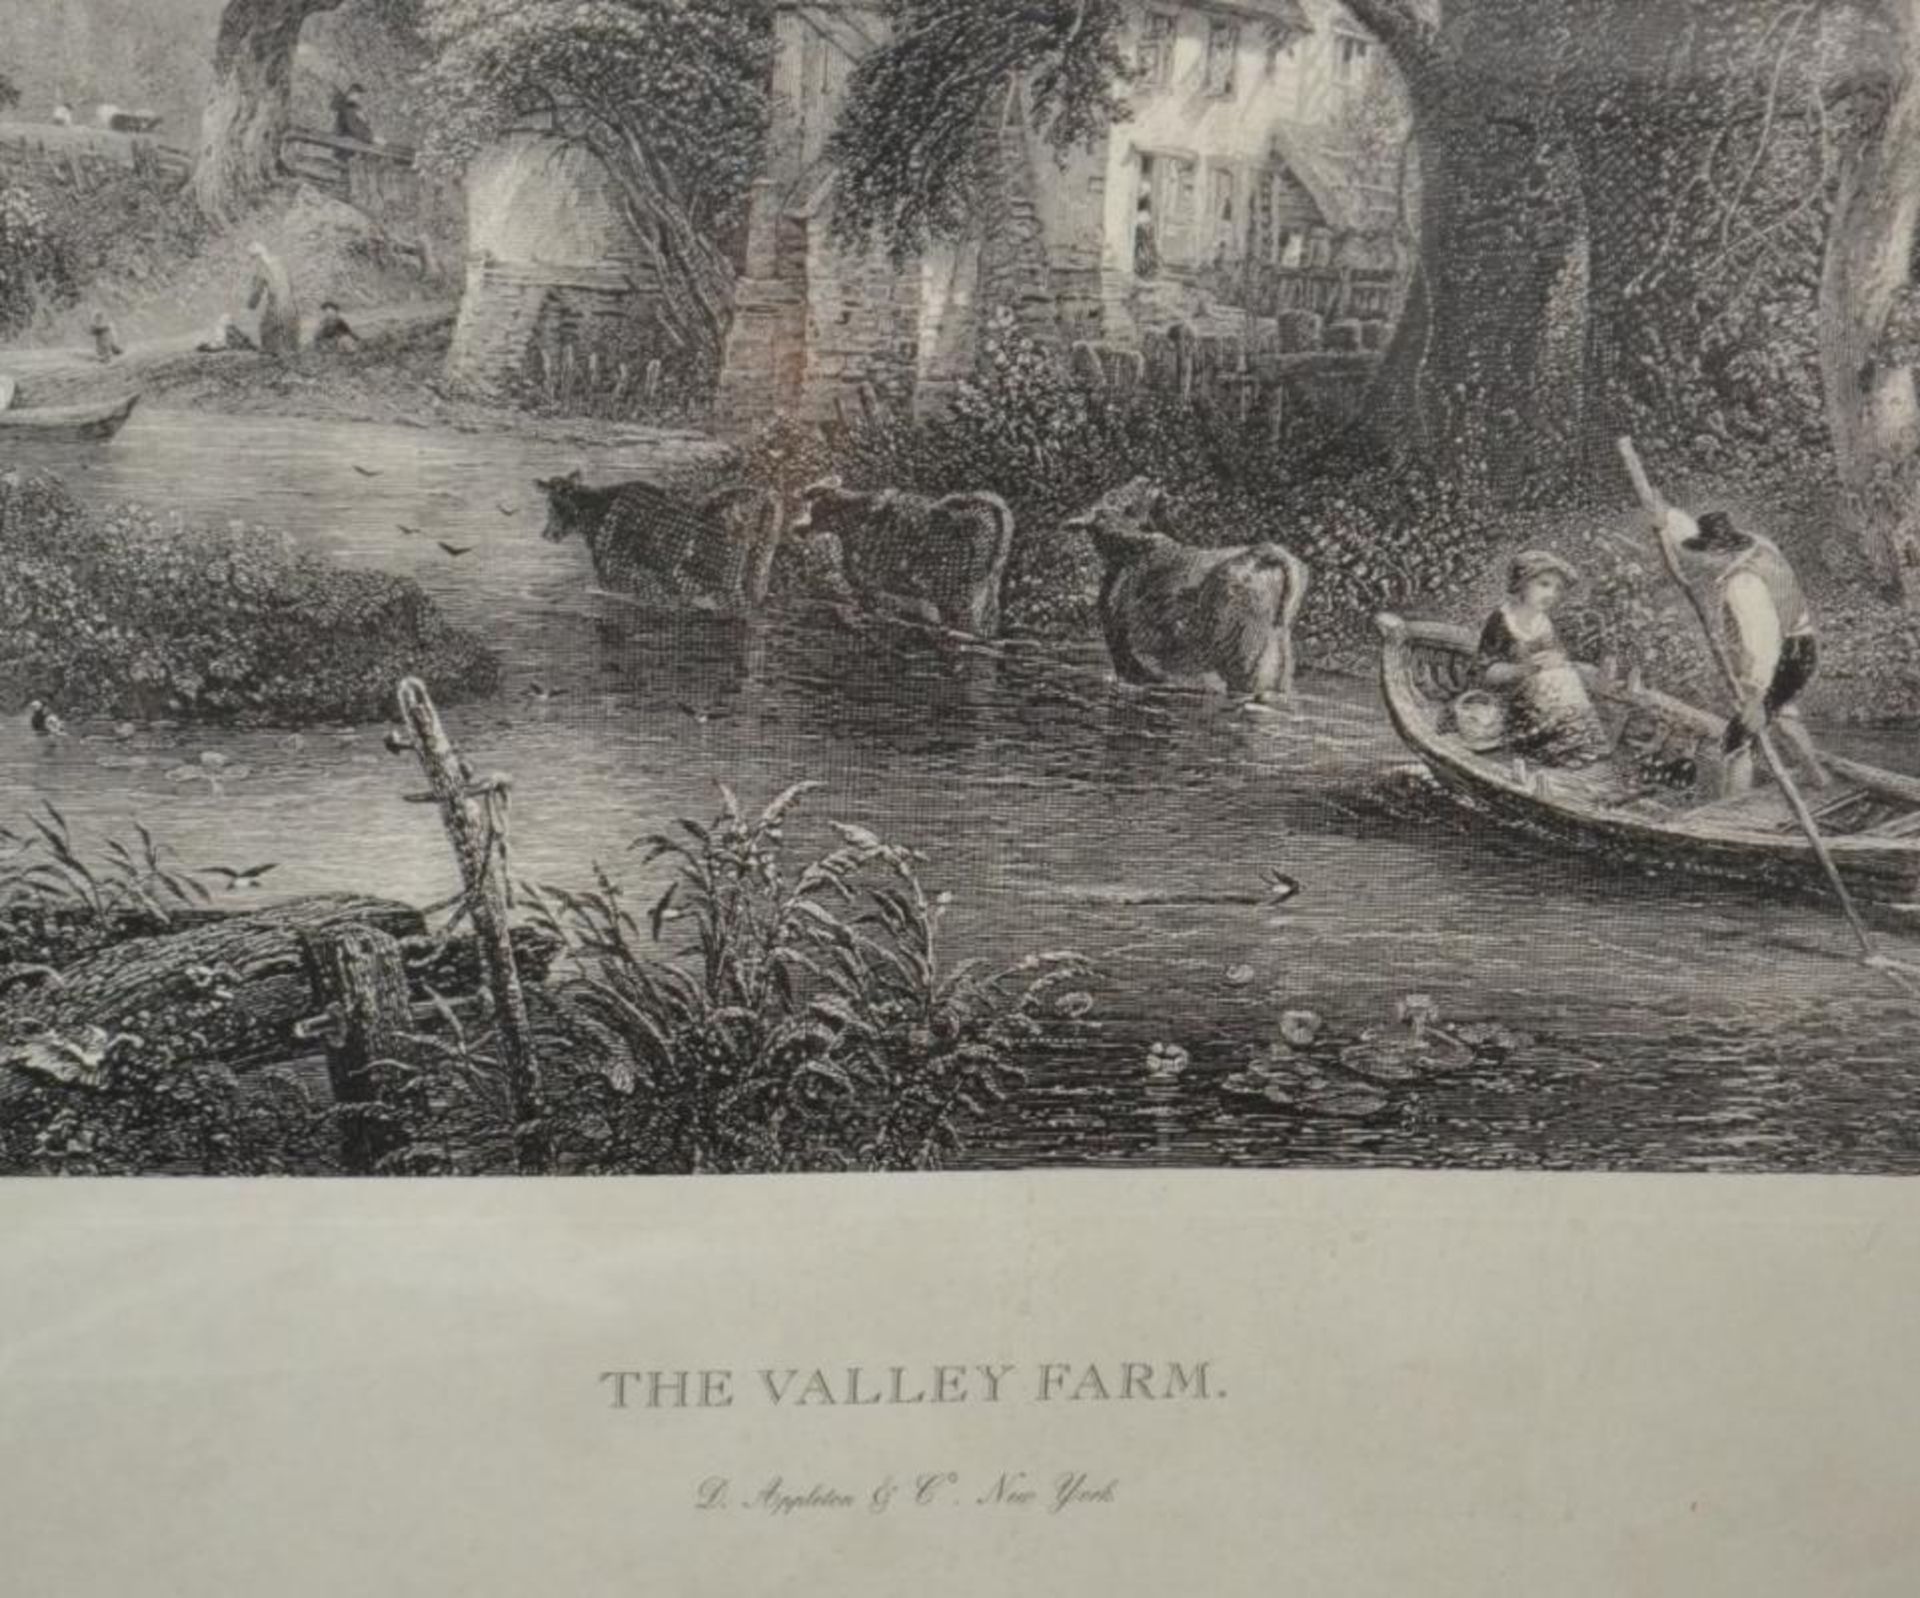 1 x Framed Picture THE VALLEY FARM By D Appleton & Co New York - 67 x 88 cms - Ref BB590 TFF - CL351 - Image 3 of 4